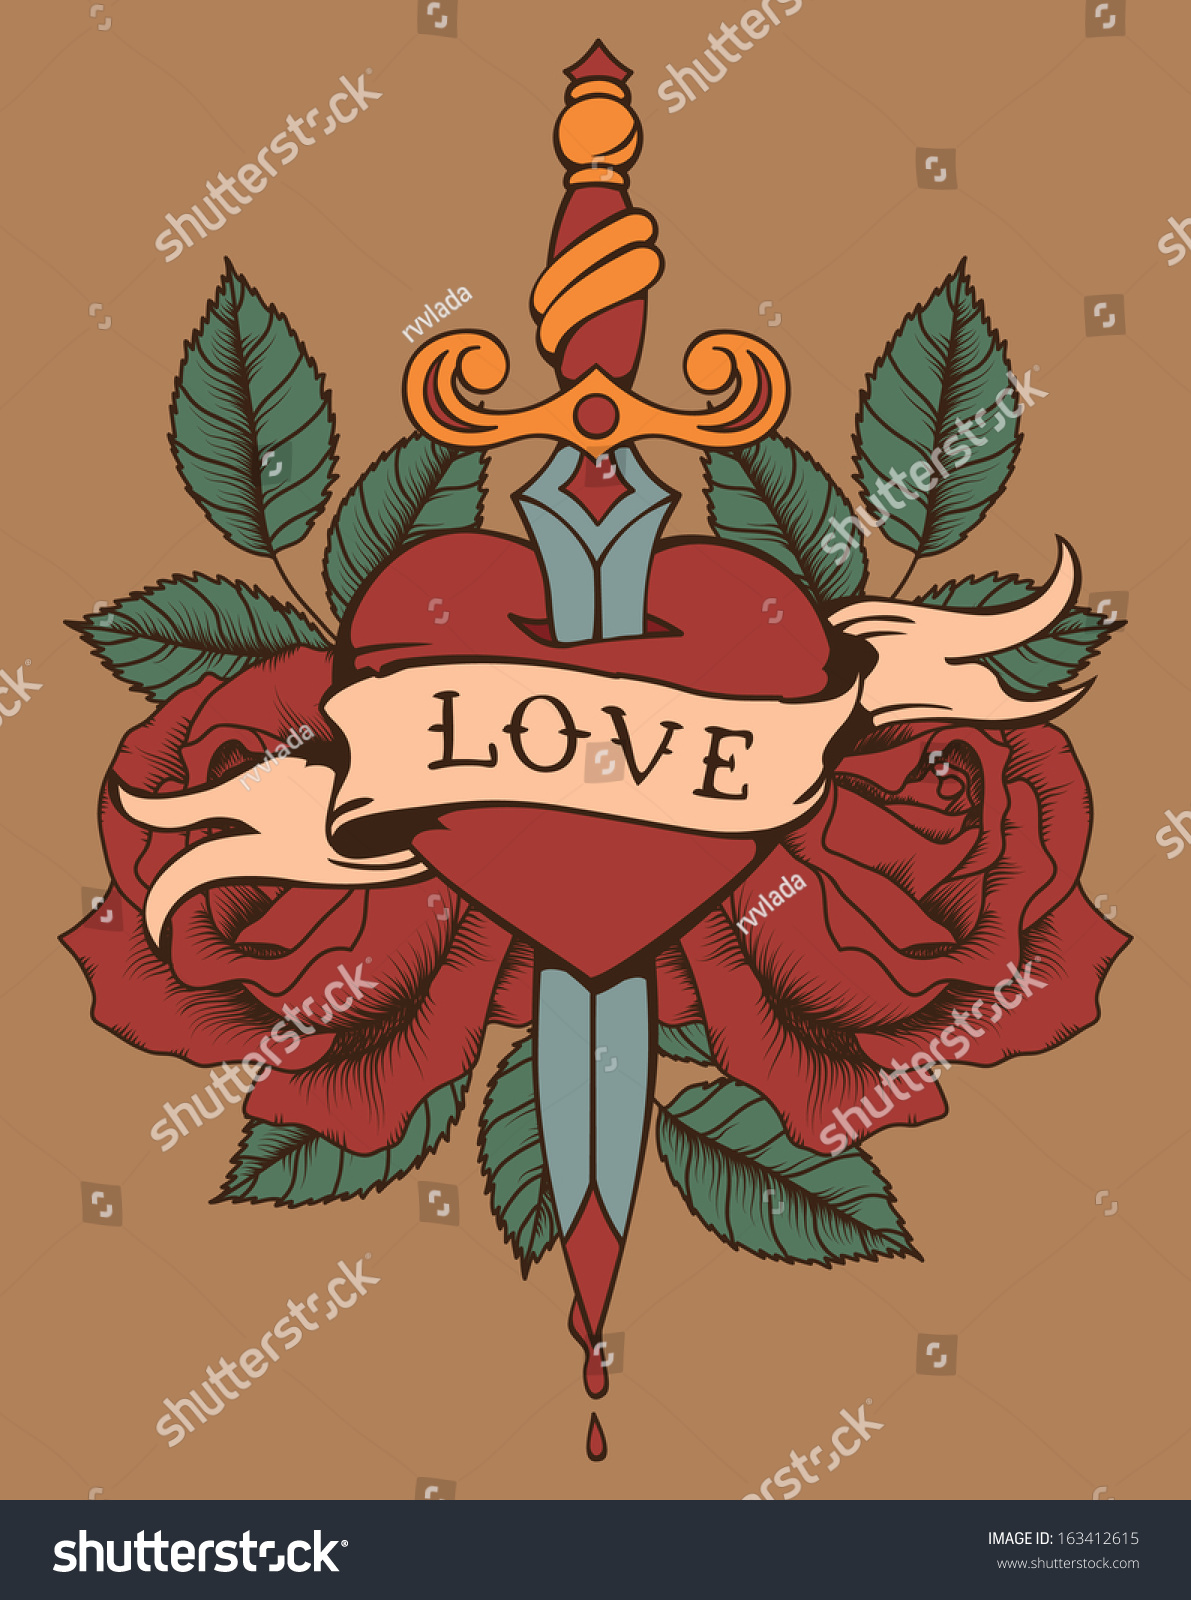 Tattoo Heart With Roses And Knife Stock Vector Illustration 163412615 ...